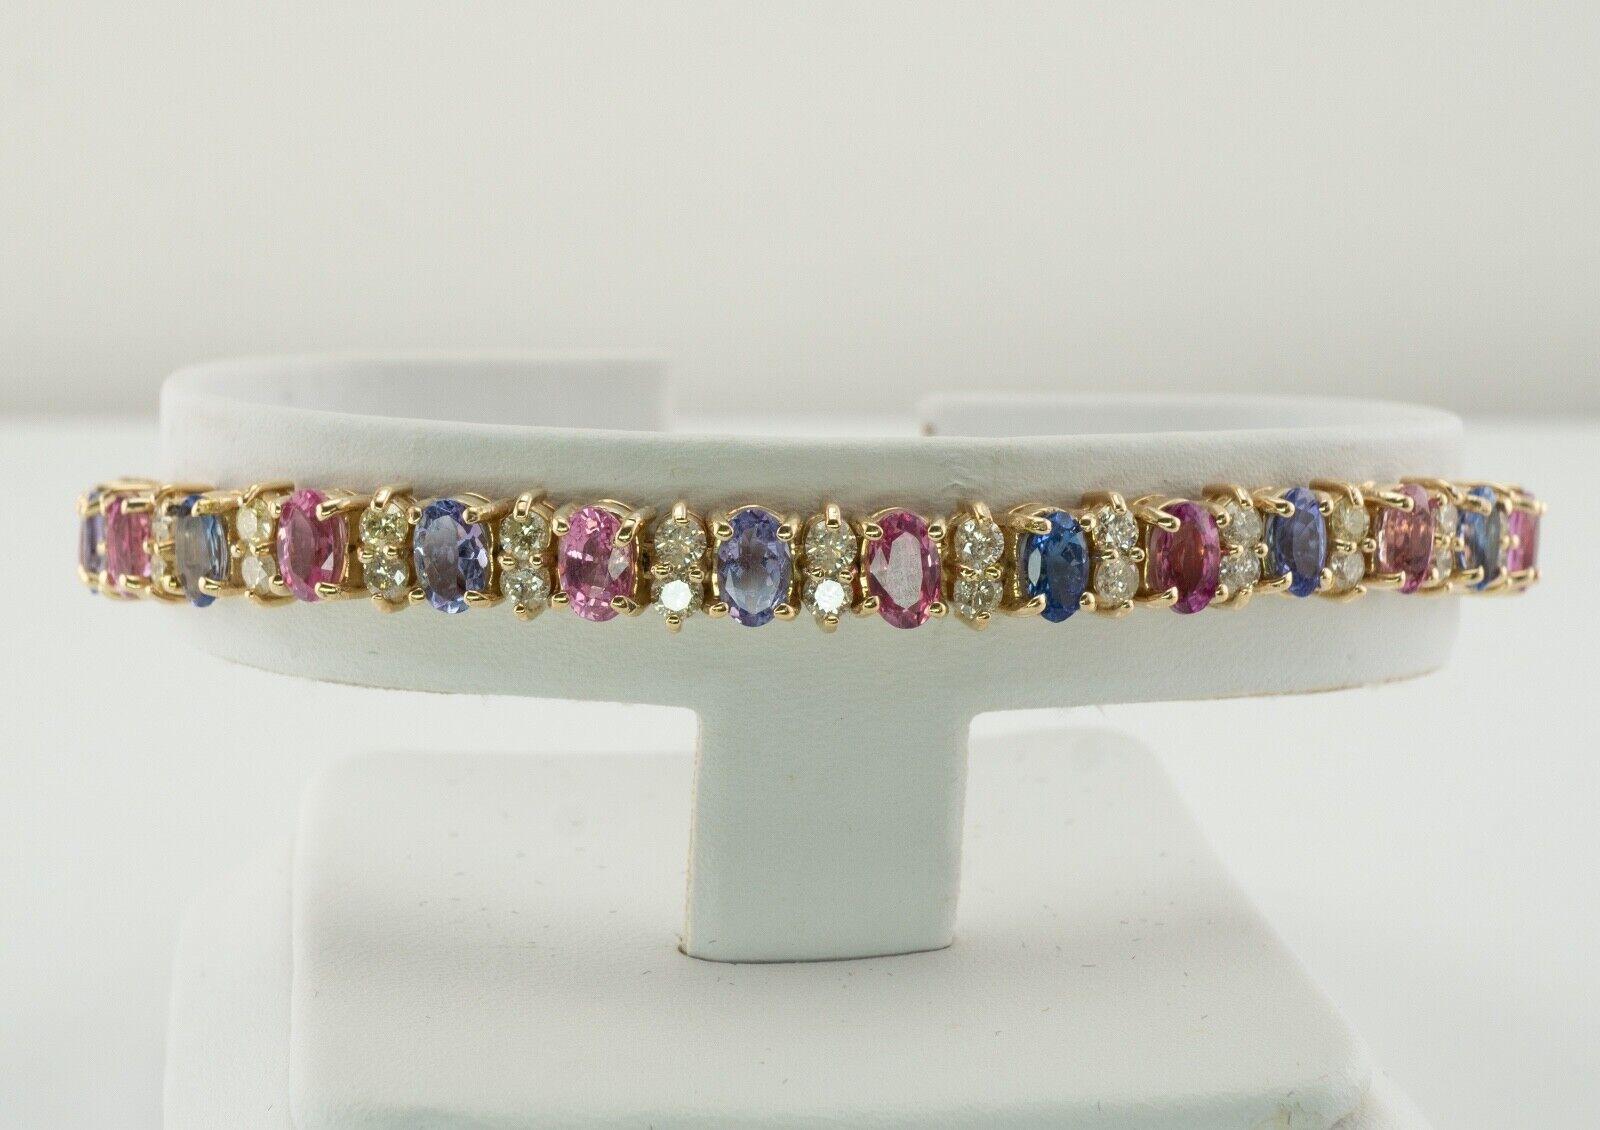 This estate bracelet is crafted in solid 14K Yellow Gold (carefully tested and guaranteed). It is set with genuine Earth mined blue and pink sapphires and diamonds. Each sapphire measures 5mm x 3mm totaling 10.15 carats for 29 gems. These sapphires